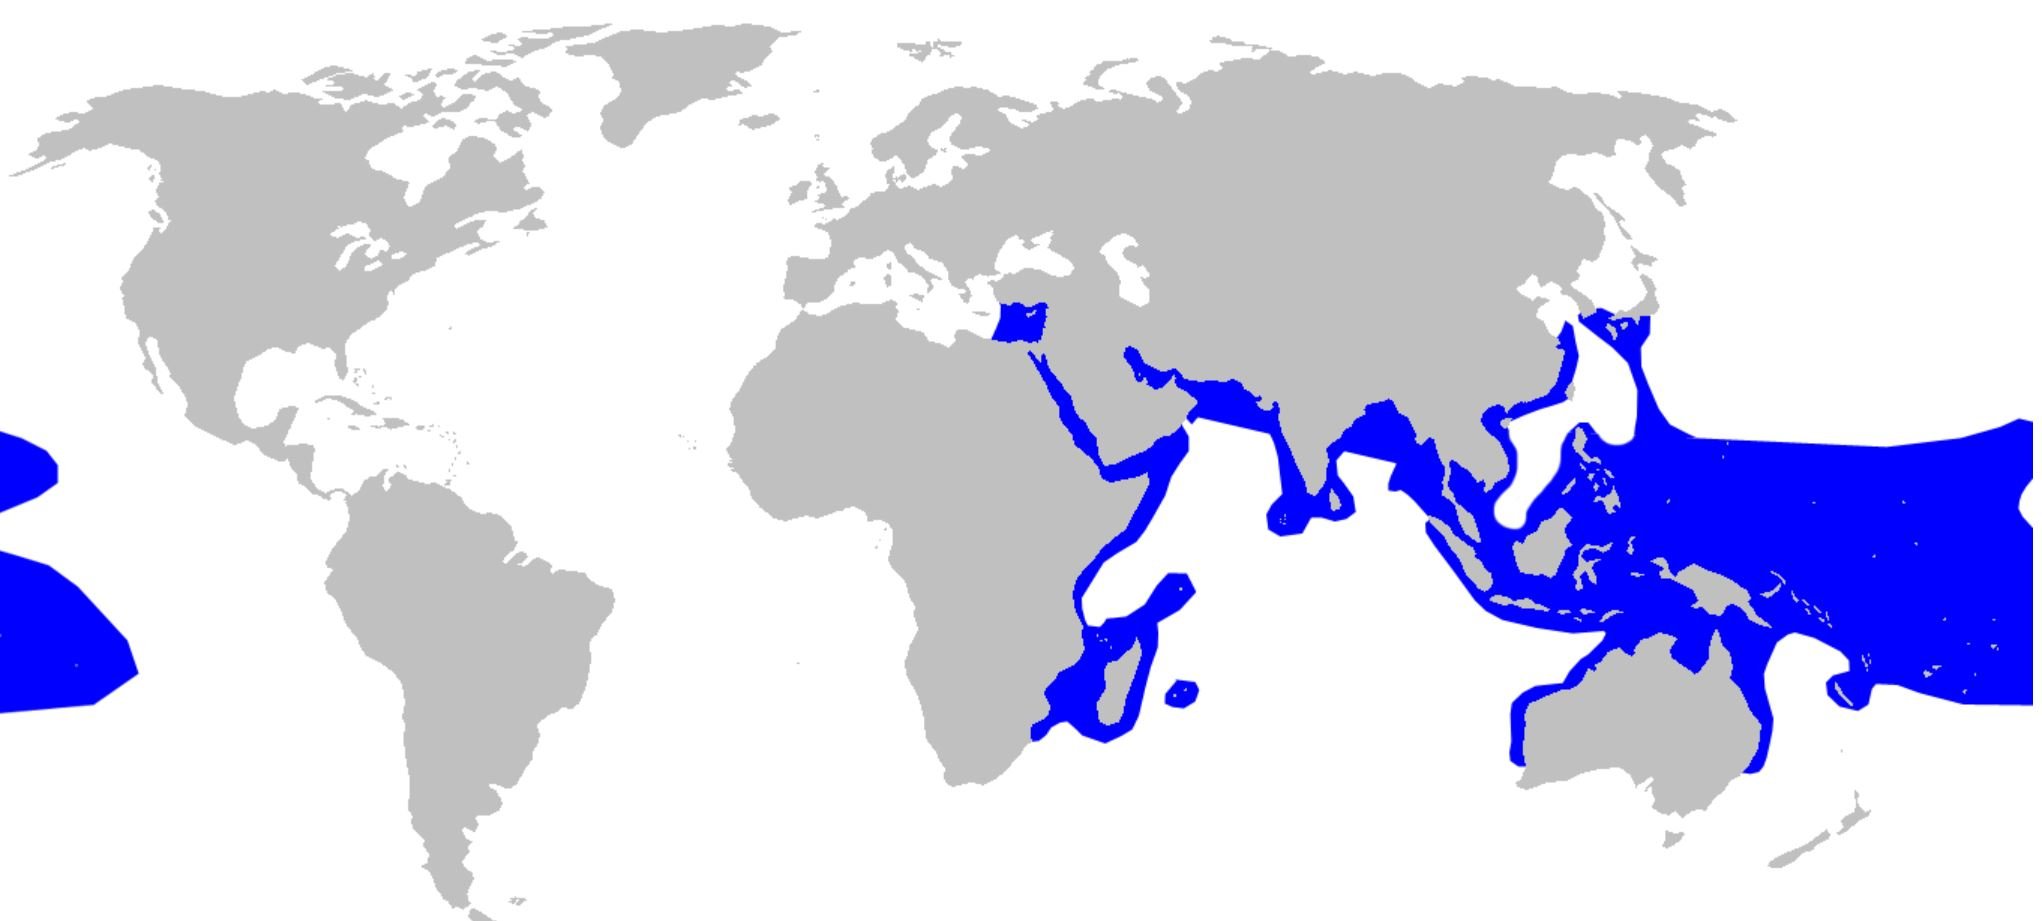 The distribution of the blacktip reef shark is shown in blue.